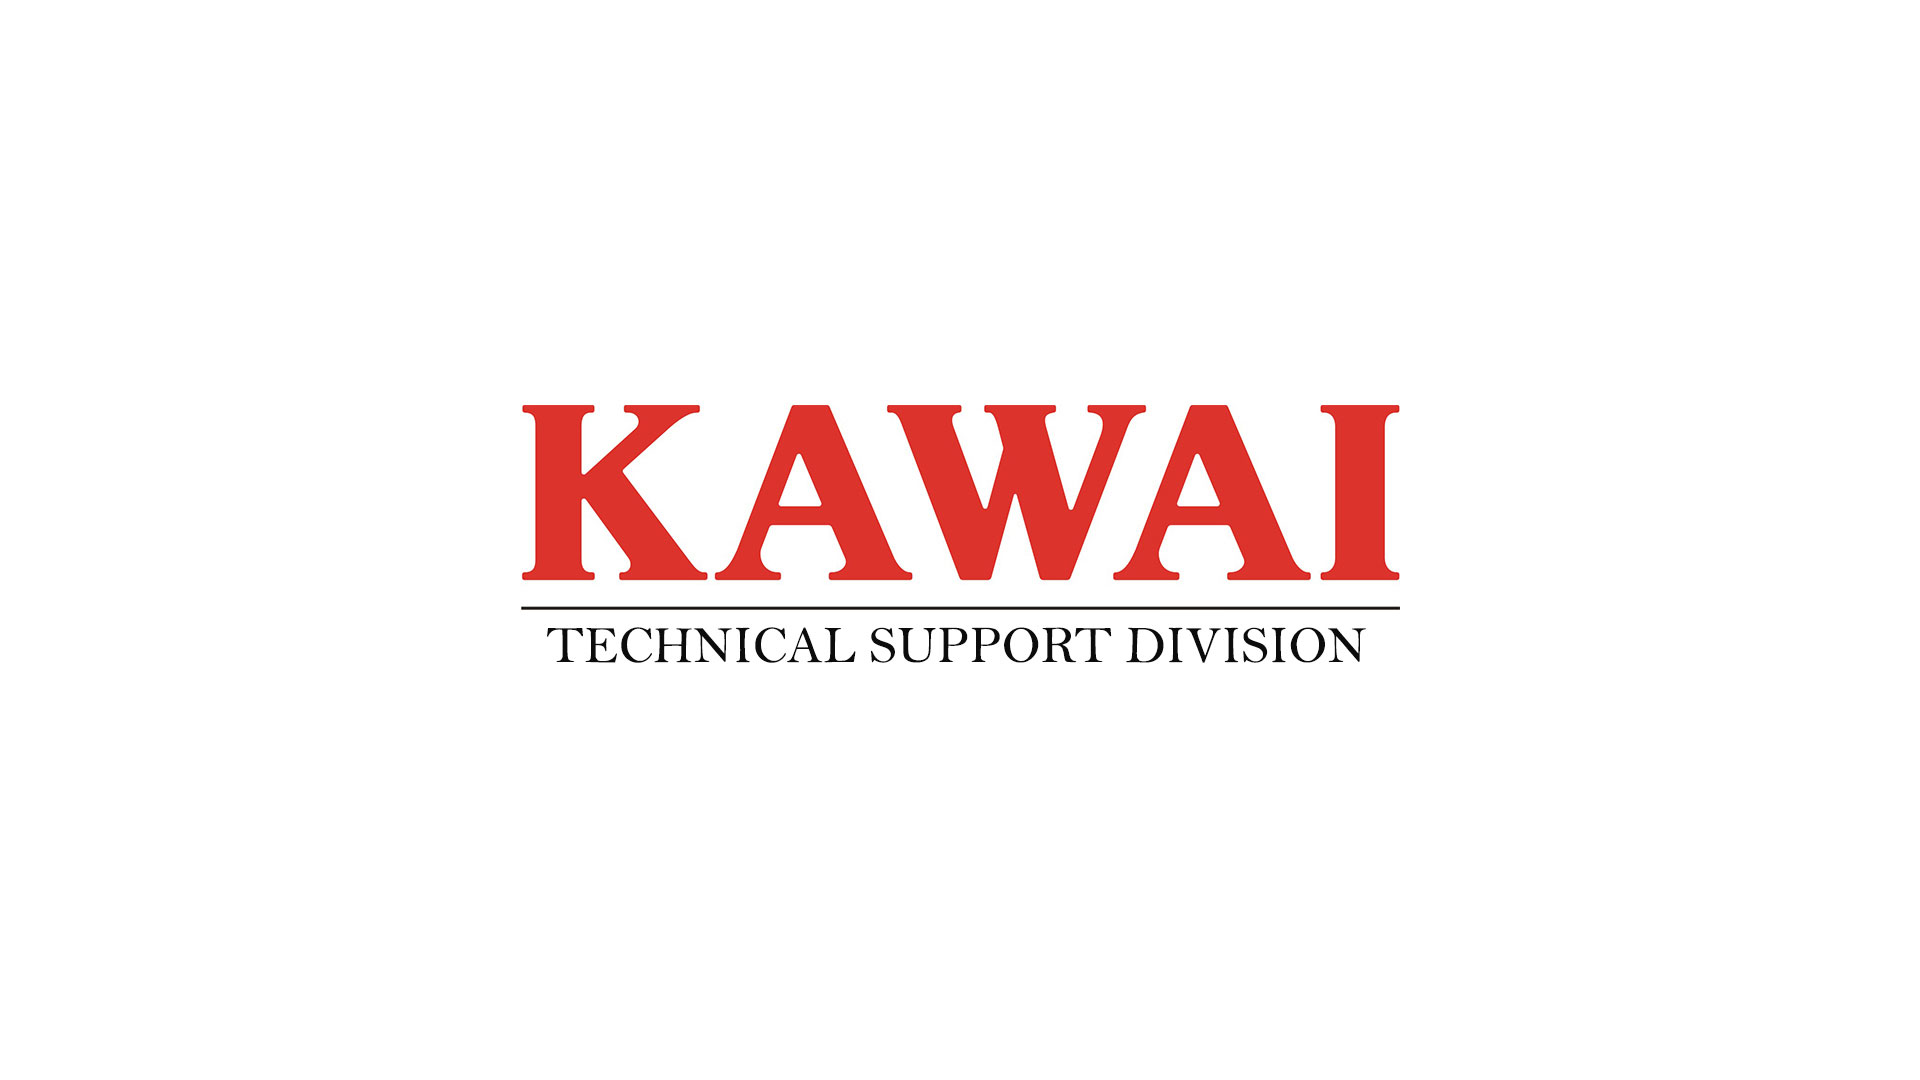 Kawai-Technical-Support-Division (1)